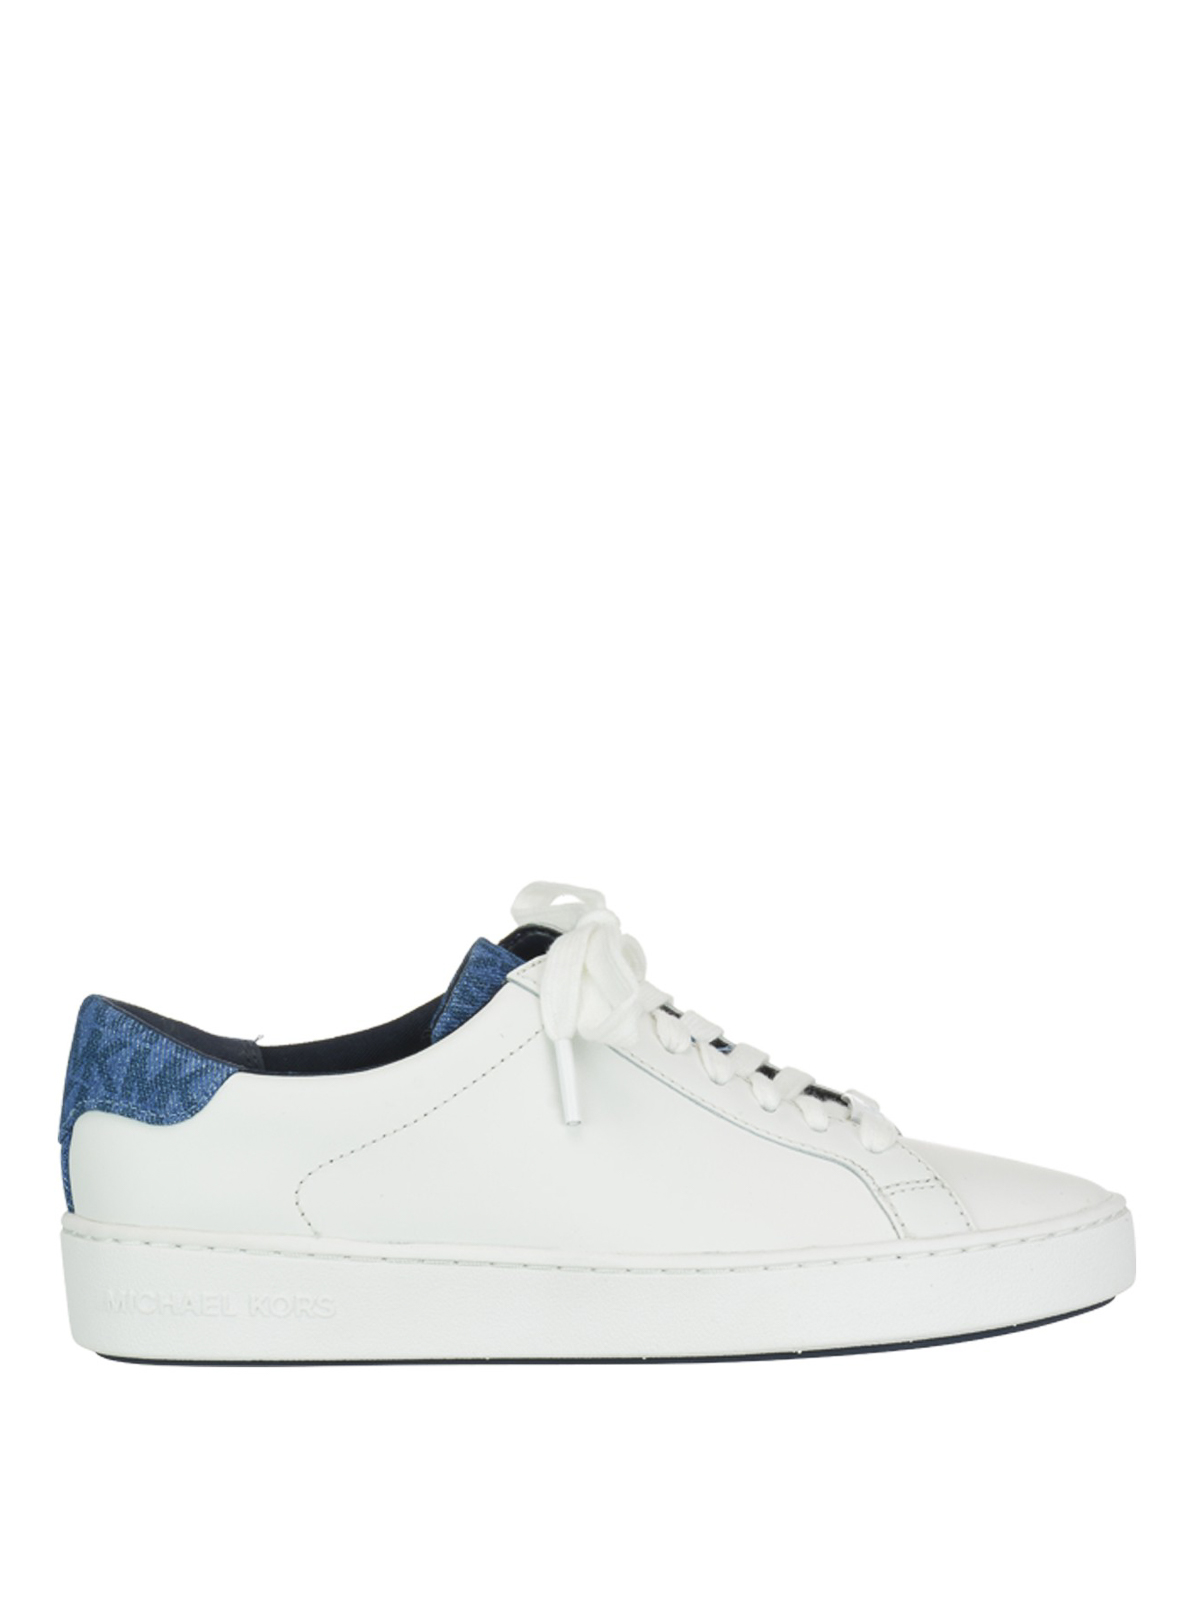 Tegenstander voldoende Druif Trainers Michael Kors - Irving white leather and denim sneakers -  43S9IRFS2L085